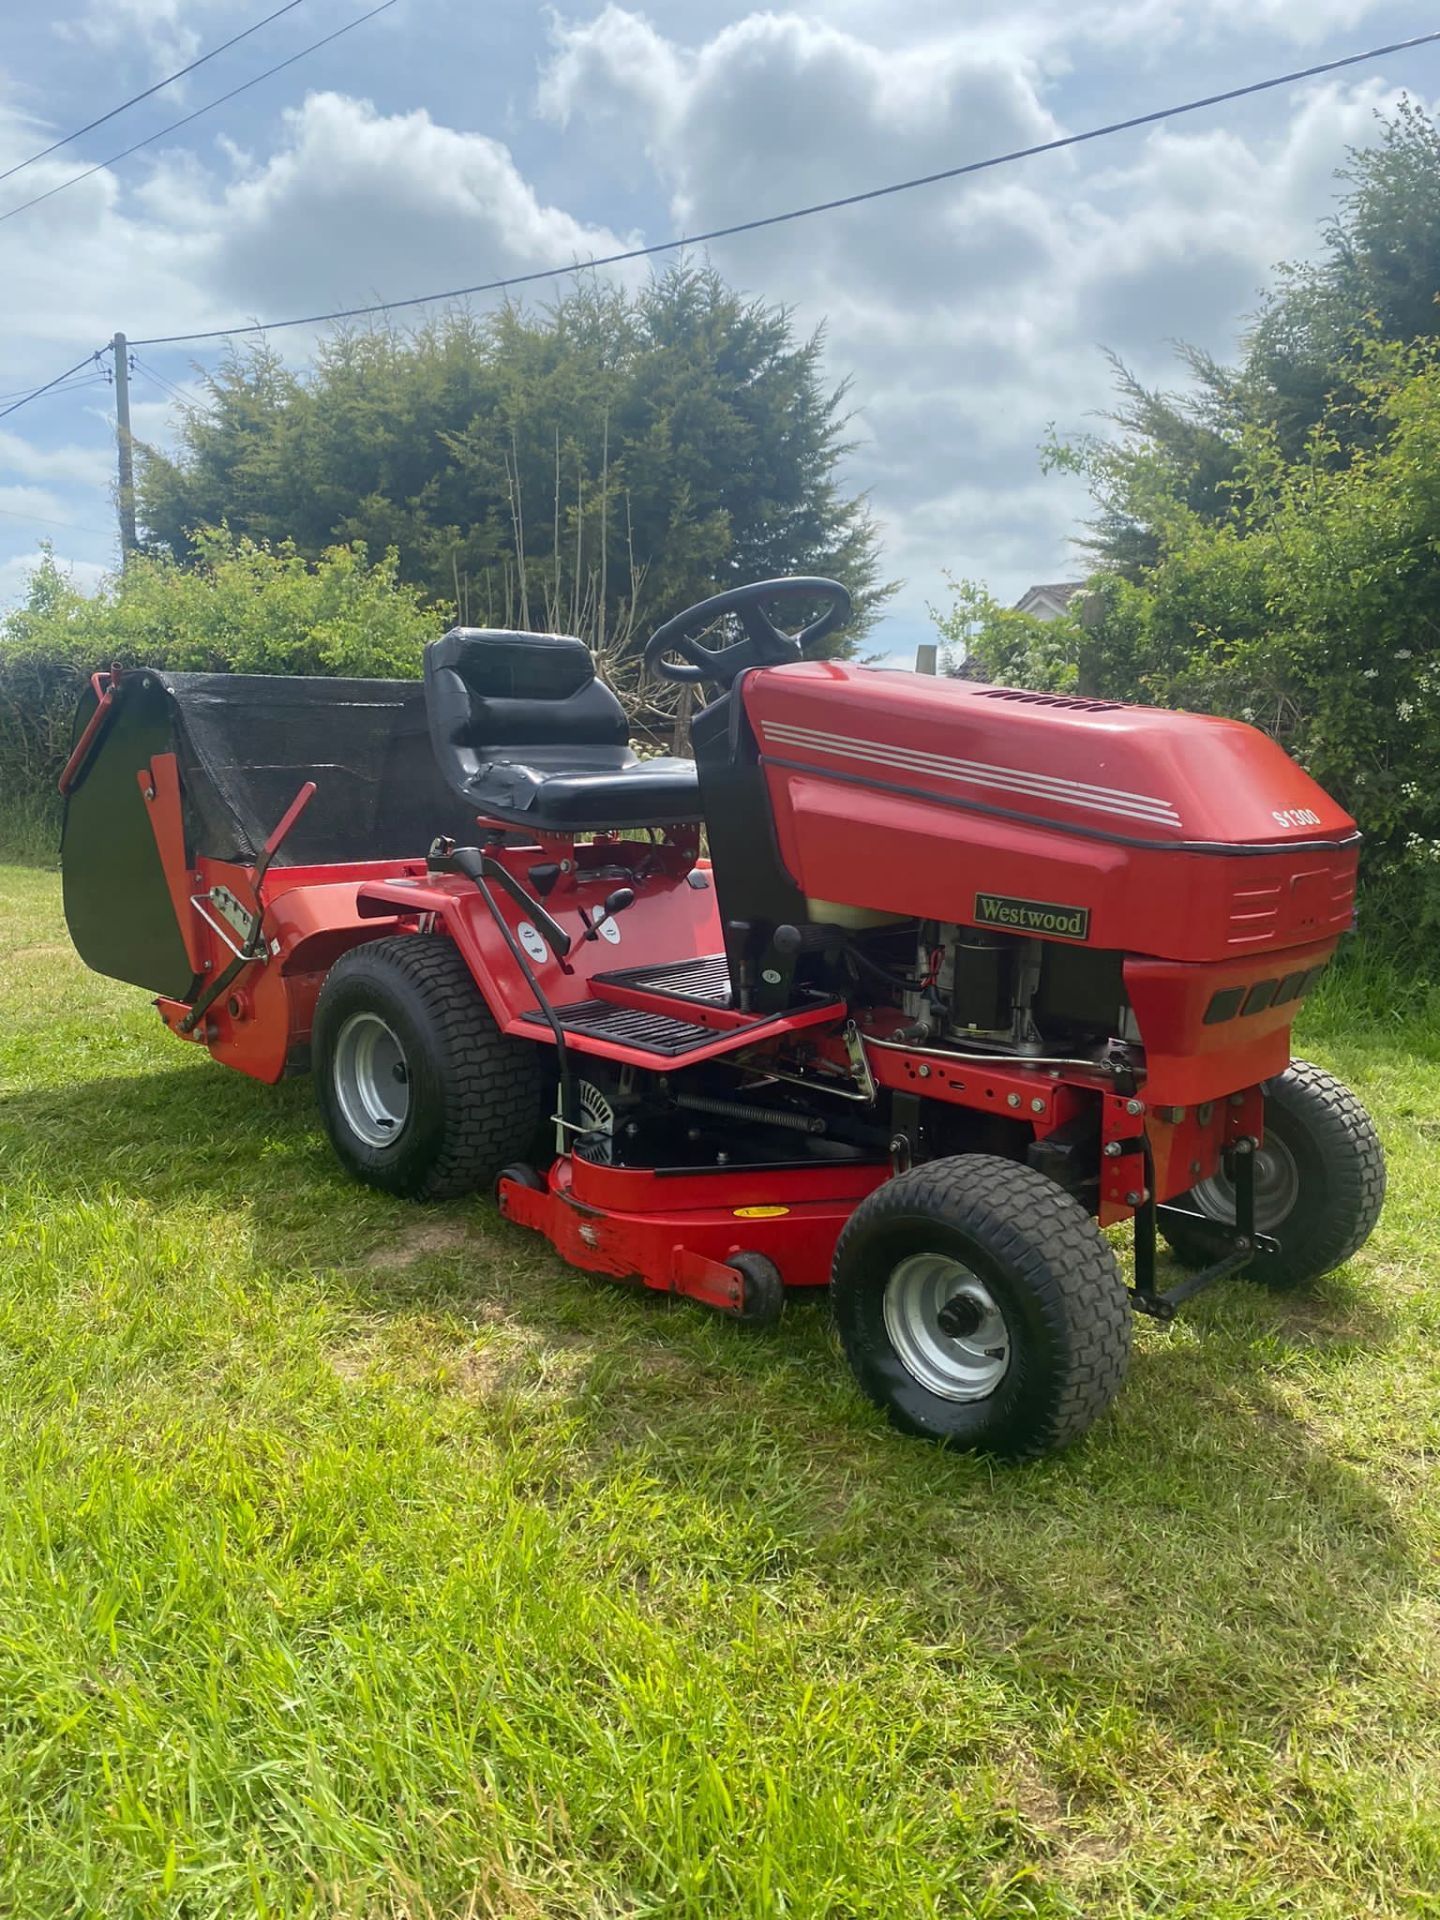 Westwood s1300 ride on lawn mower, Runs and works well, Cuts and collects well *PLUS VAT*